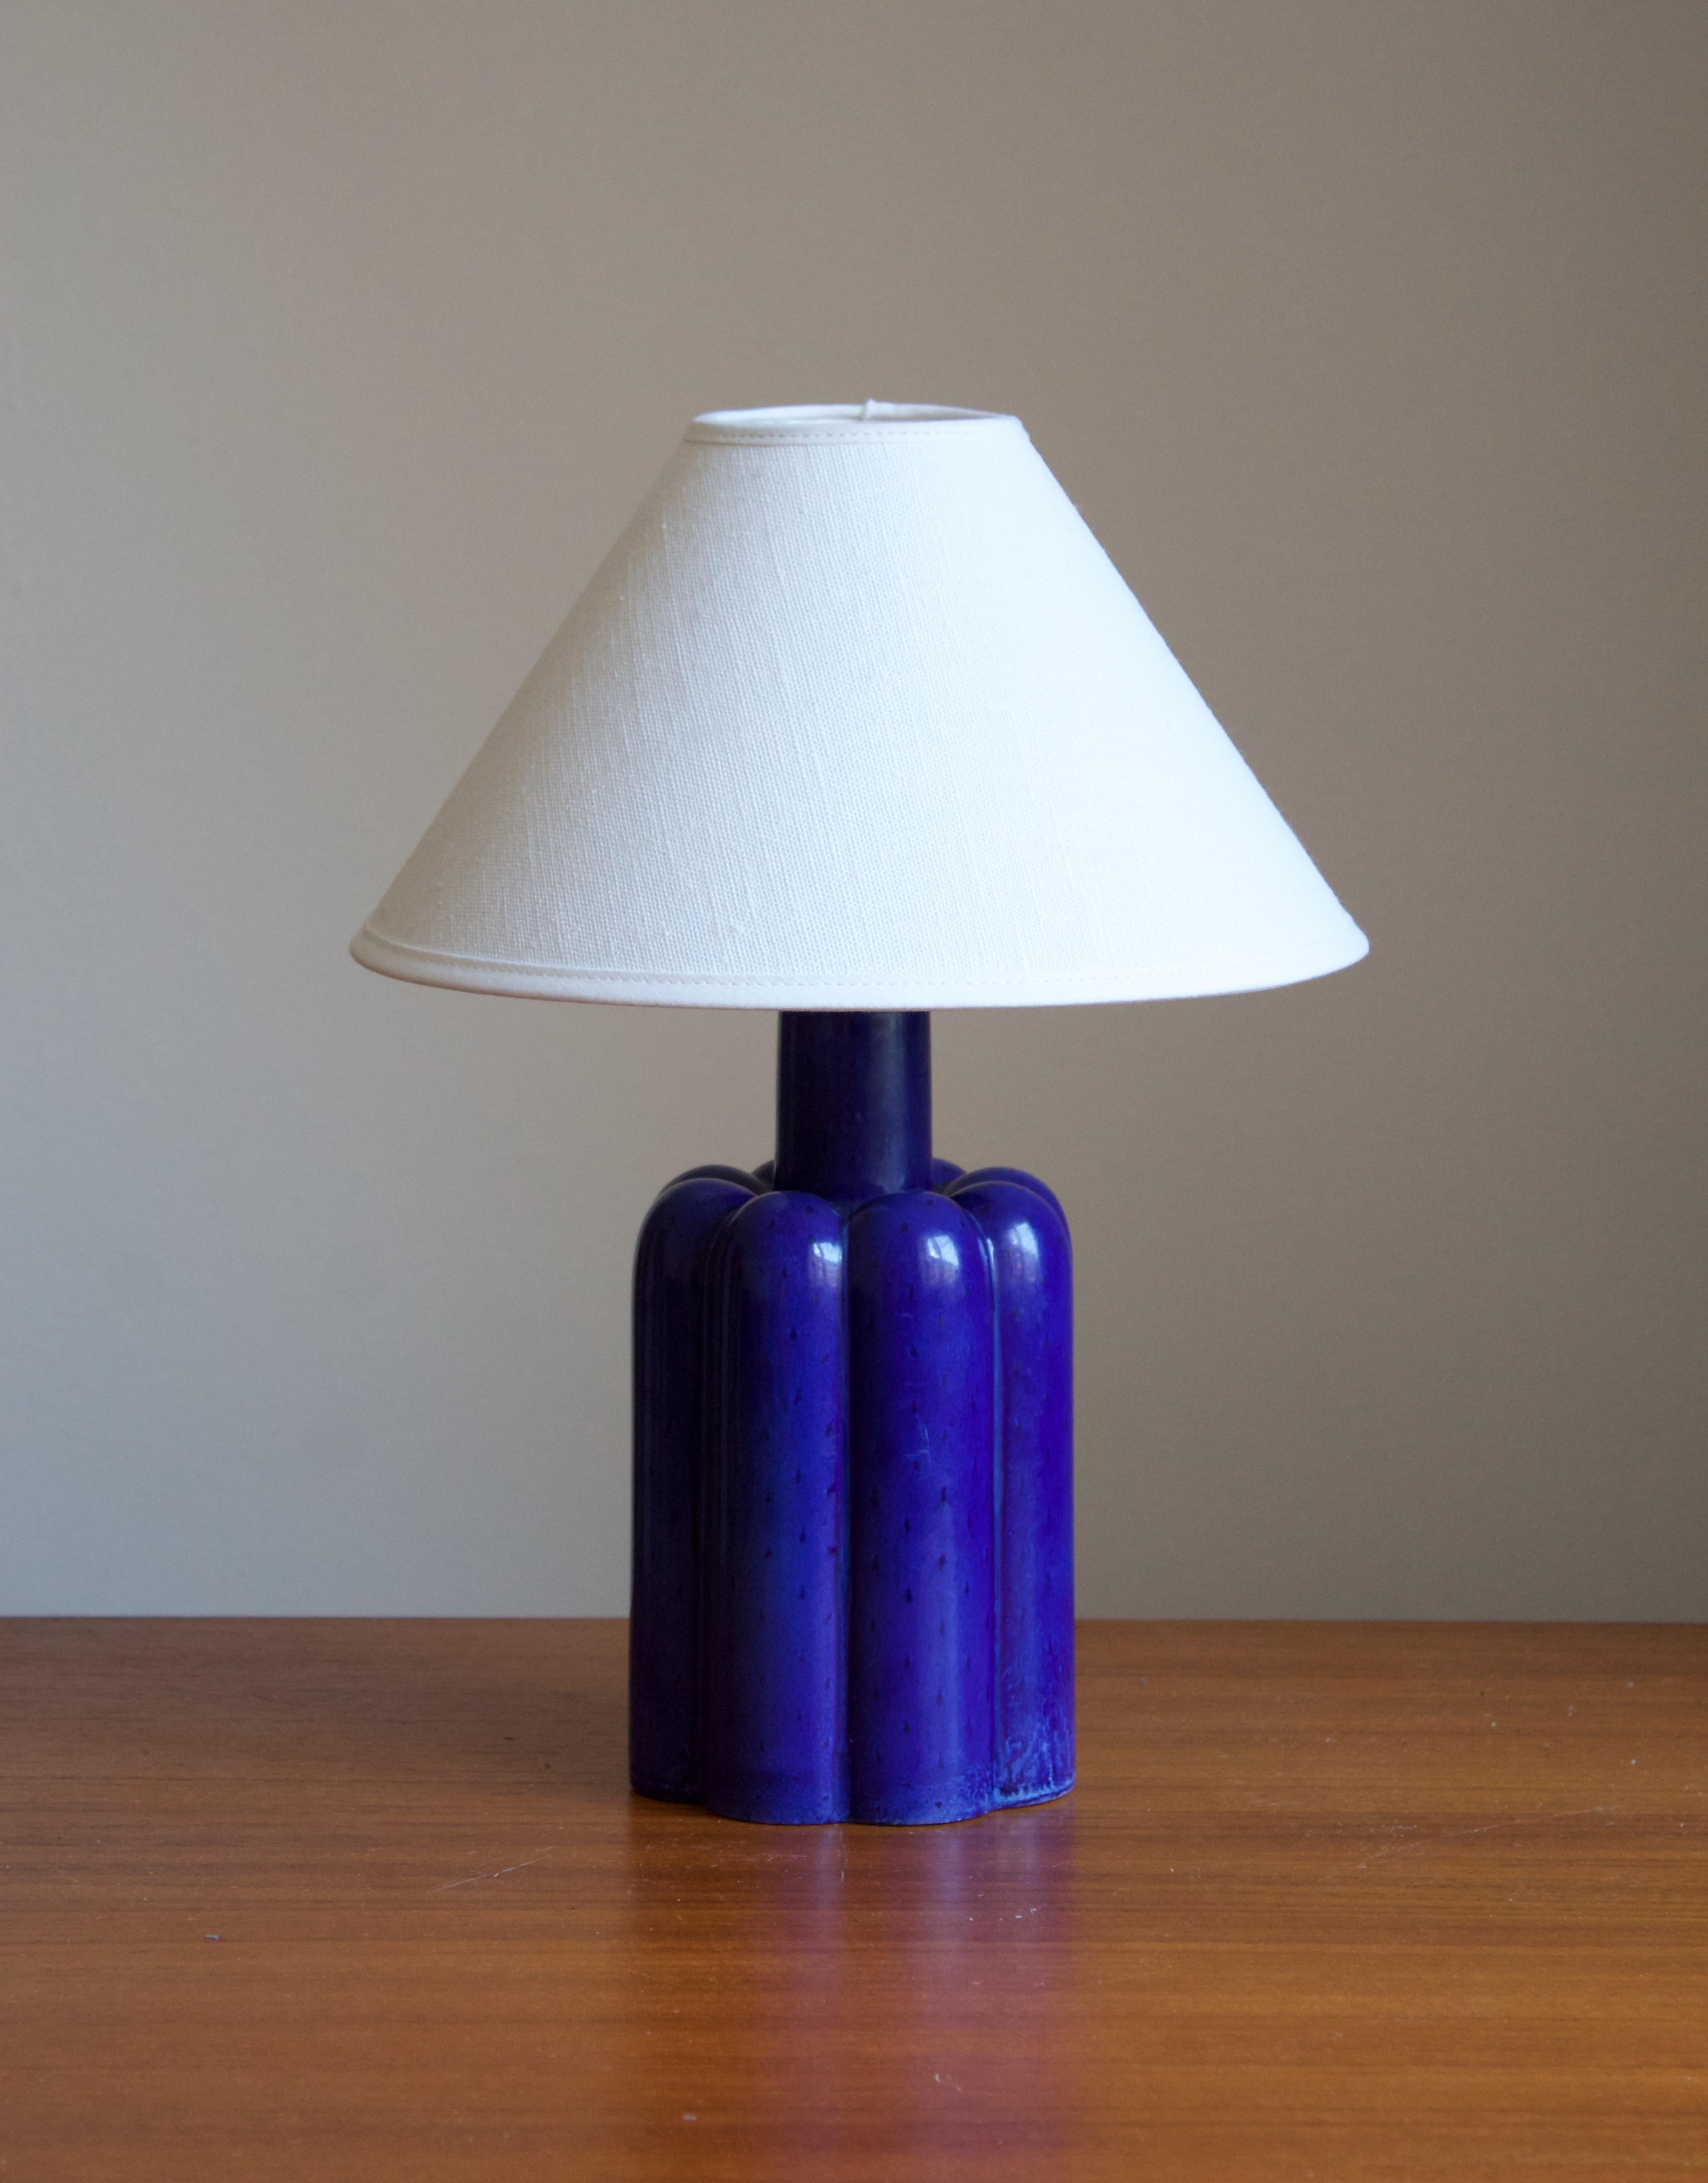 A table lamp. Designed by Arthur Percy, produced by Gefle Porslinsfabrik, Sweden, 1940s. Stamped

Stated dimensions exclude lampshade, height includes socket. Sold without lampshade.